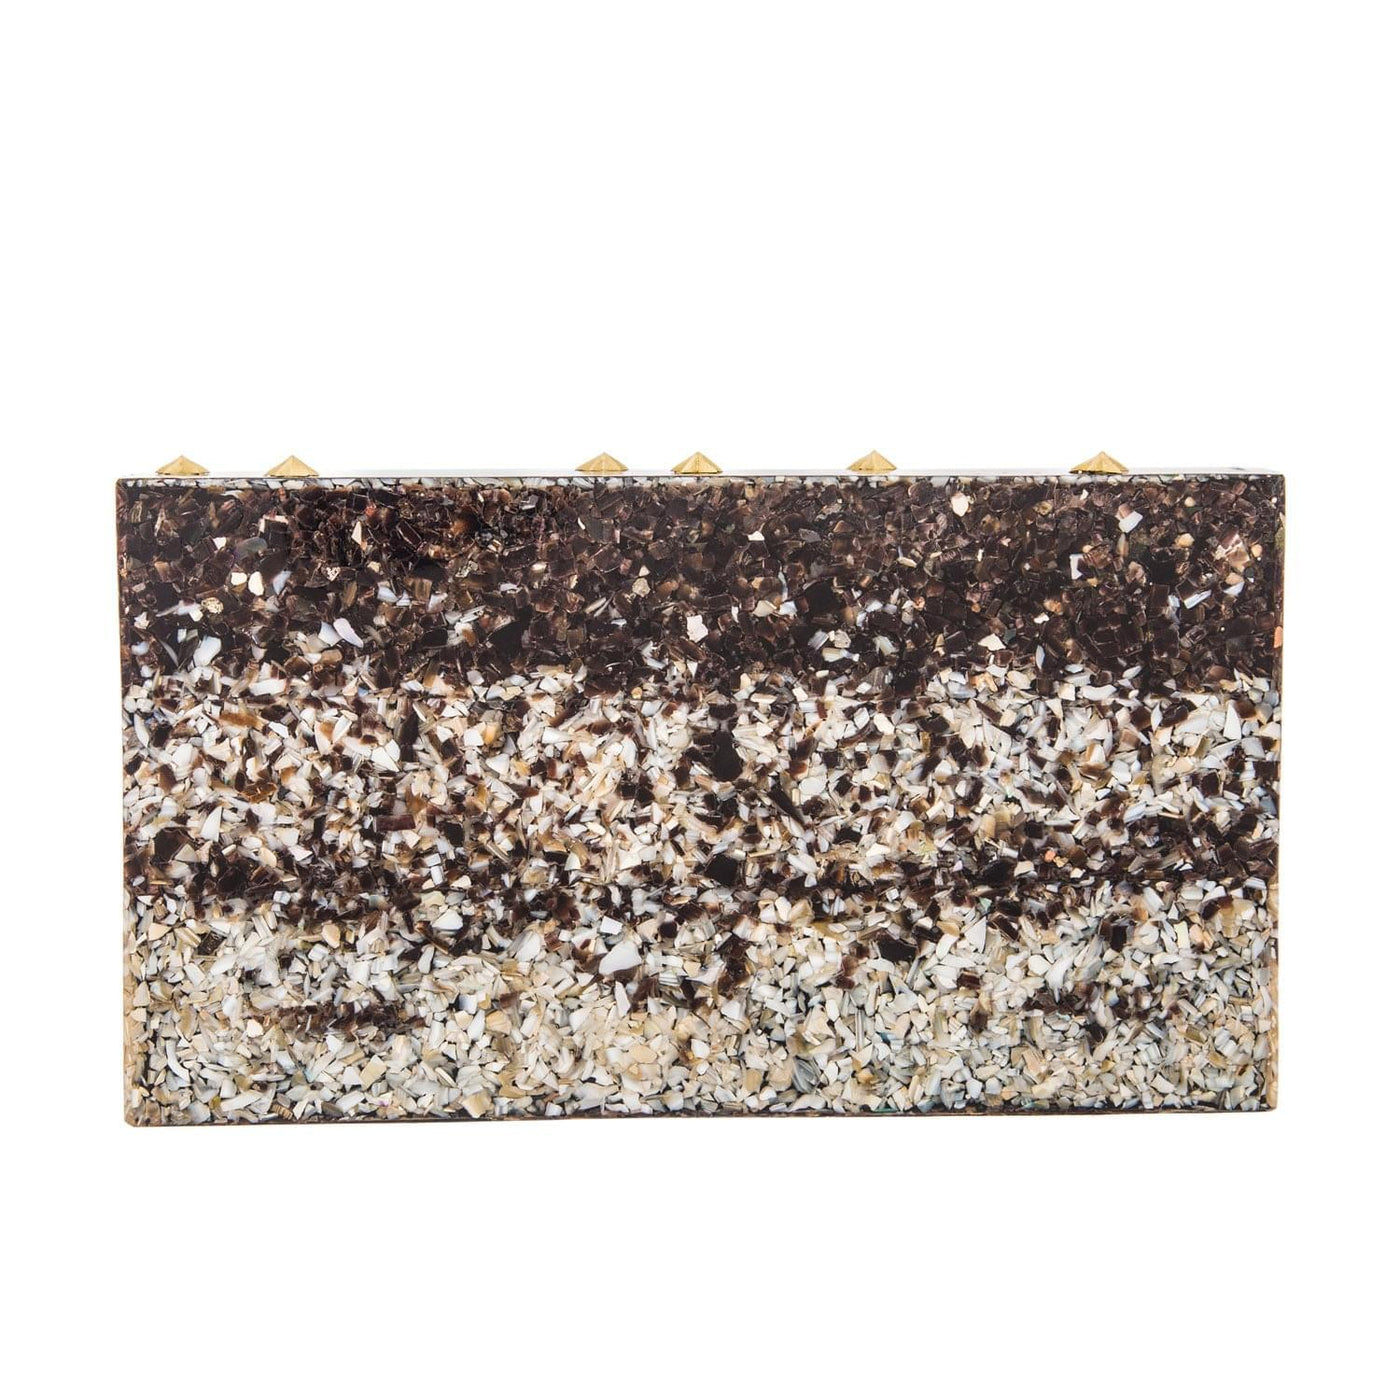 Asteria Clutch - Women's clutch bag in gold and shell